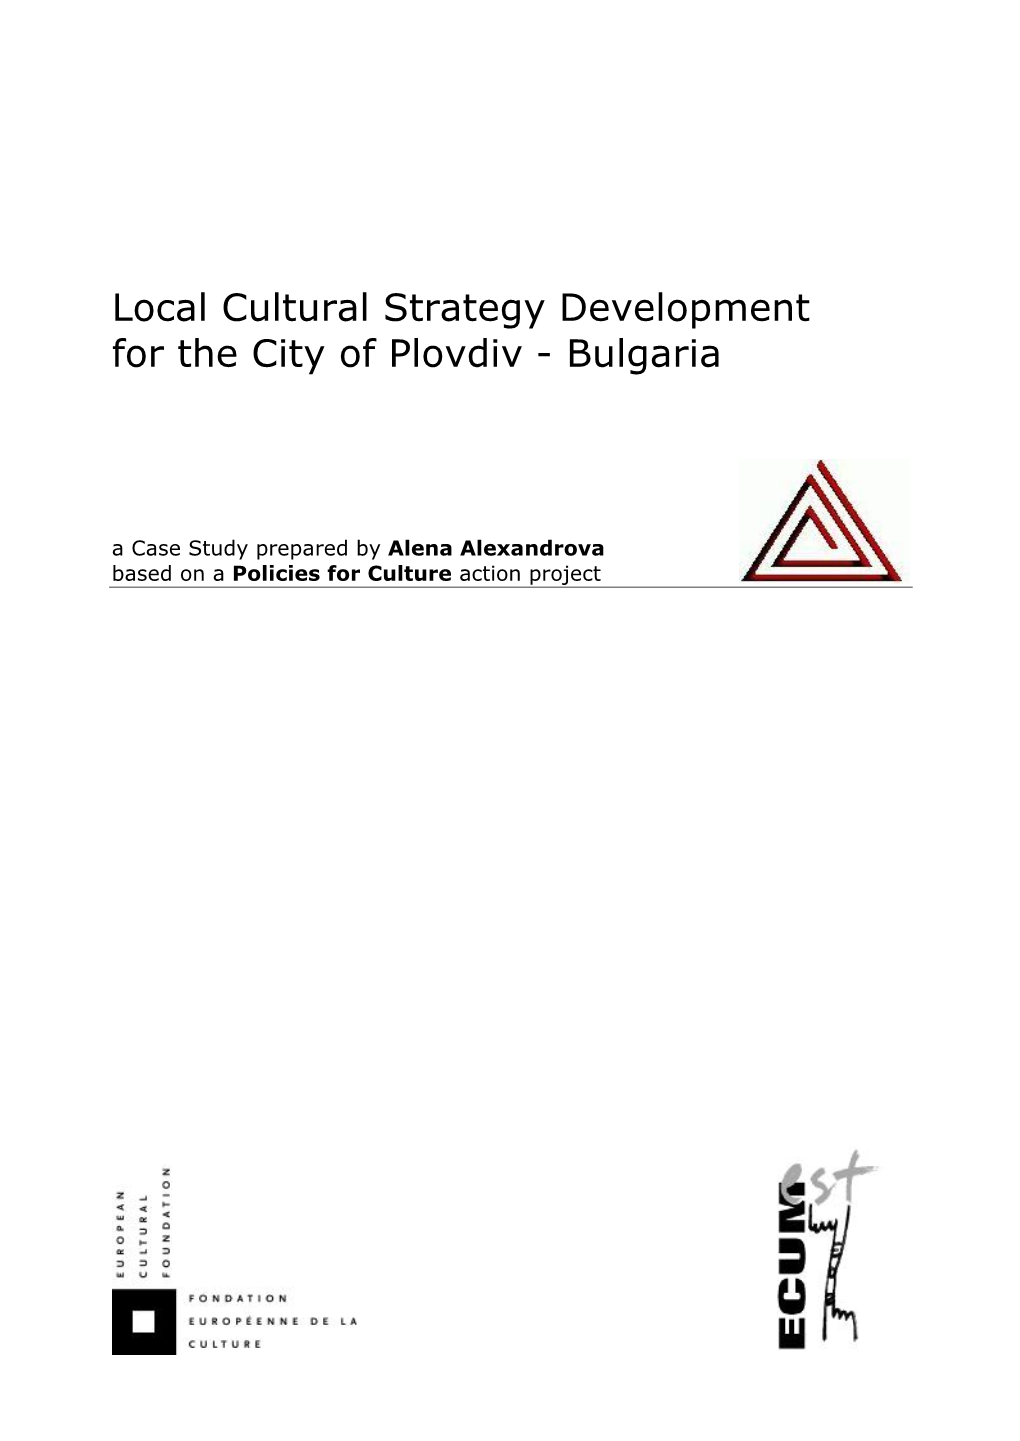 Local Cultural Strategy Development for the City of Plovdiv - Bulgaria